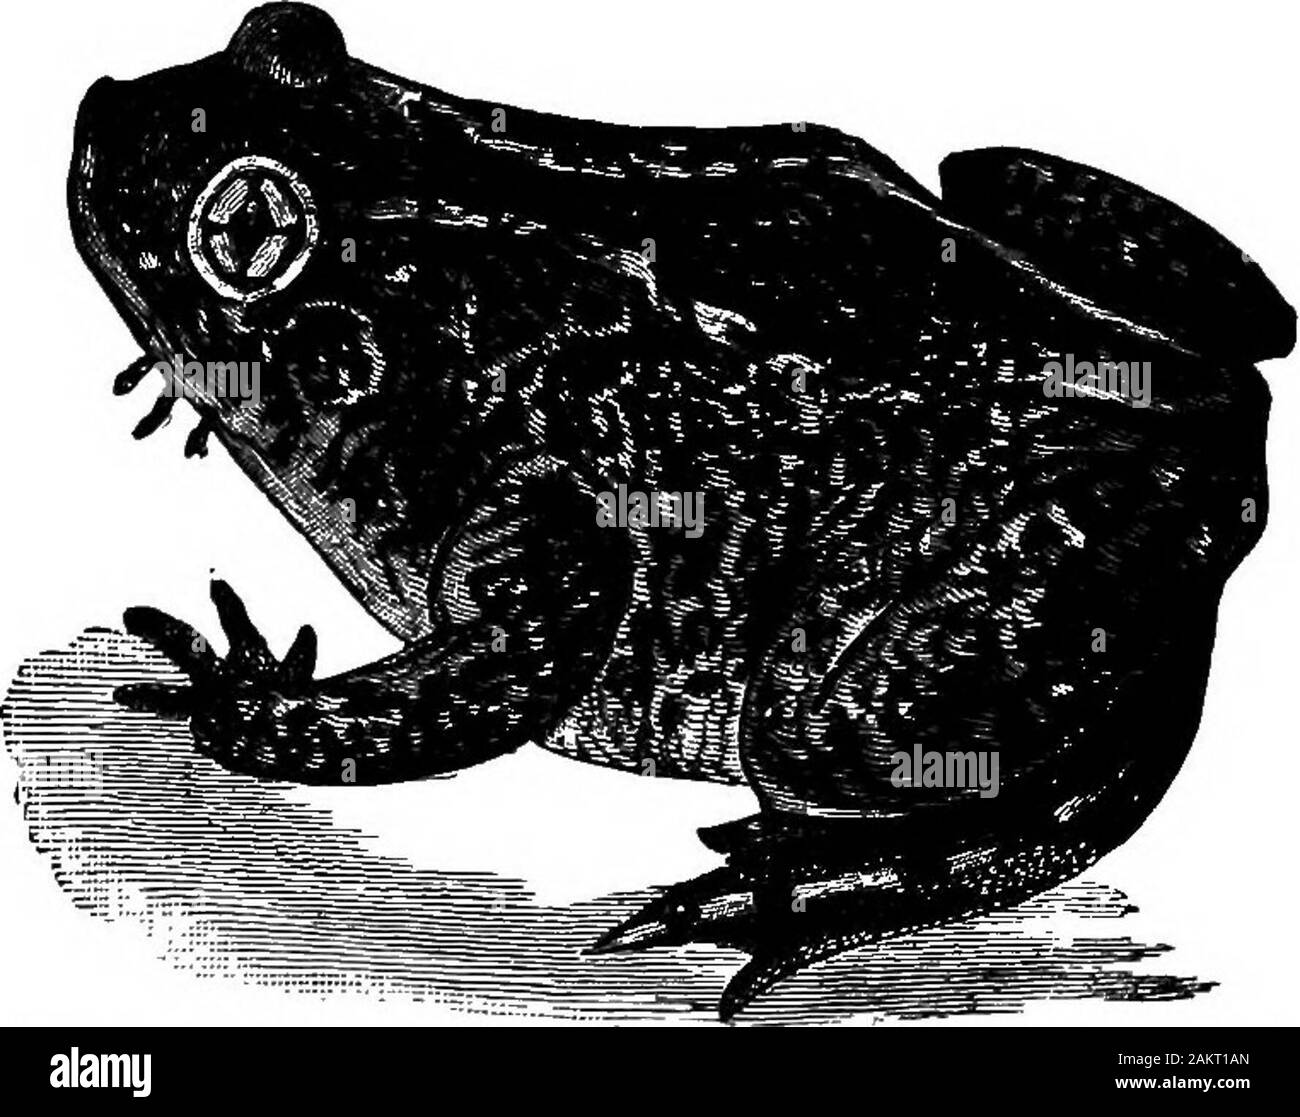 First lesson in zoology : adapted for use in schools . C D Fig. 184.—Different stages in the Metamorphosis of the Toad. long double strings, and the tadpoles are usually hatched inabout ten days after the eggs are laid. The toads and frogs after hatching pass through a wonderfulseries of changes before reaching maturity. Fig. 184 repre-sents the external changes of the toad from the time it is^ hatched until the form of the adult is attained. The tadpolesof our American toad are smaller and blacker in all stages ofgrowth than those of the frog. The tadpole is at first with-out any limbs (Fig. Stock Photo